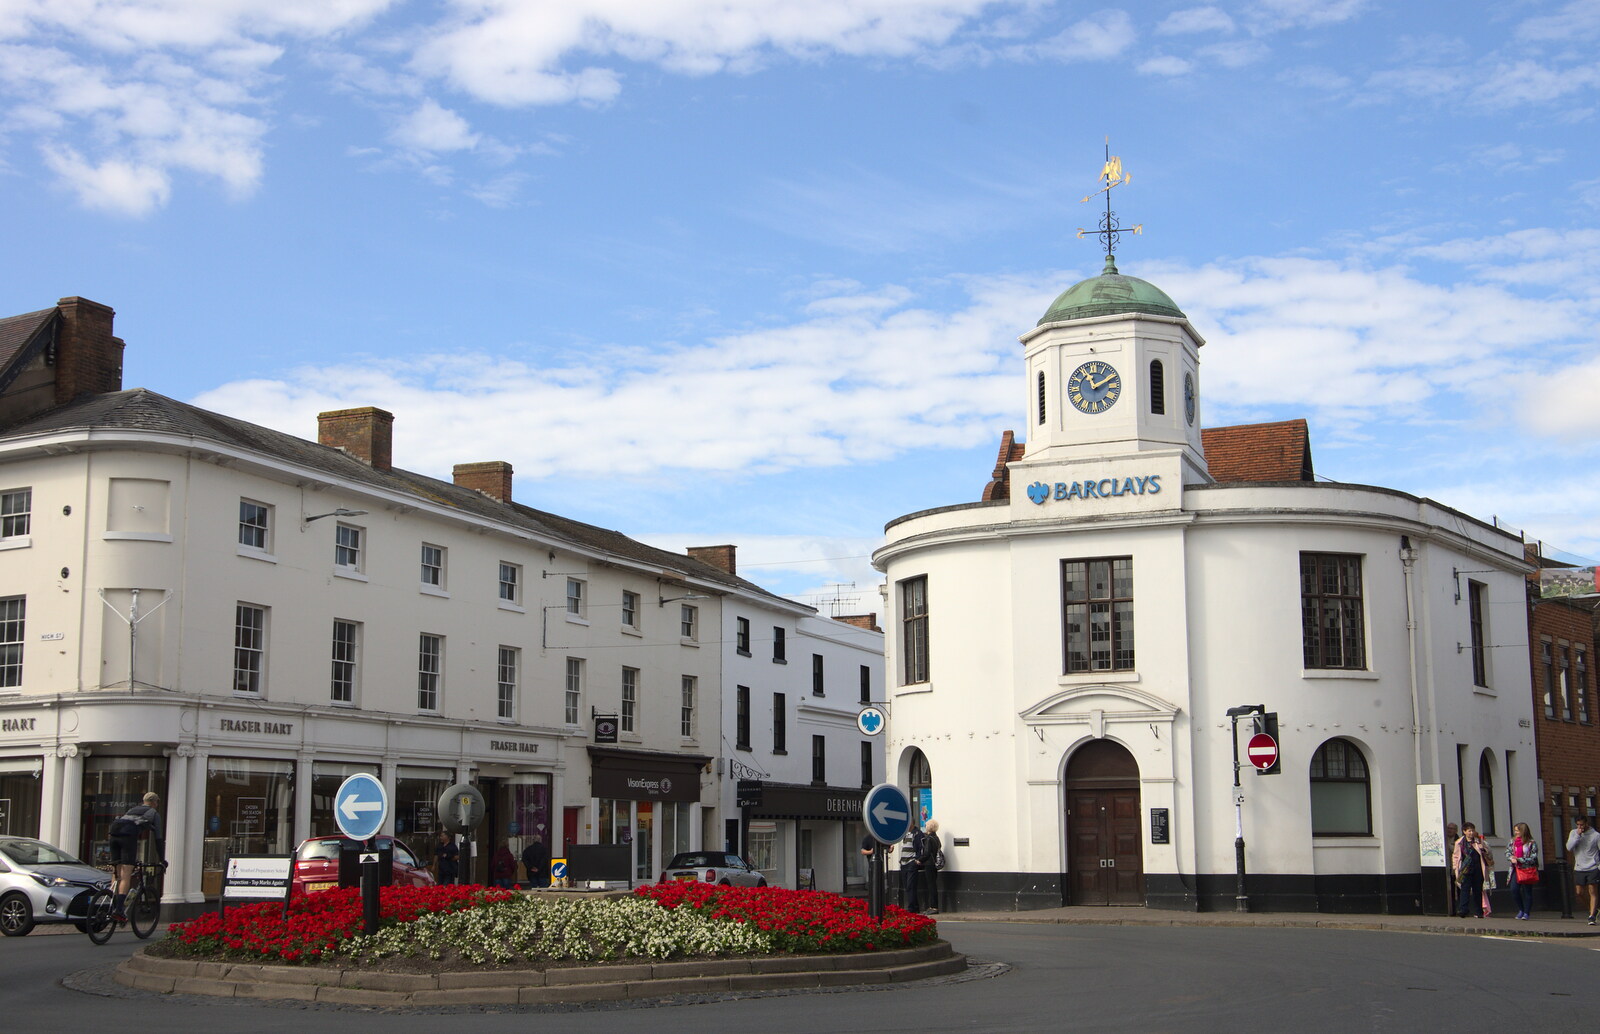 The Barclays Bank on the top of Bridge Street from A Postcard from Stratford-upon-Avon, Warwickshire - 9th September 2018